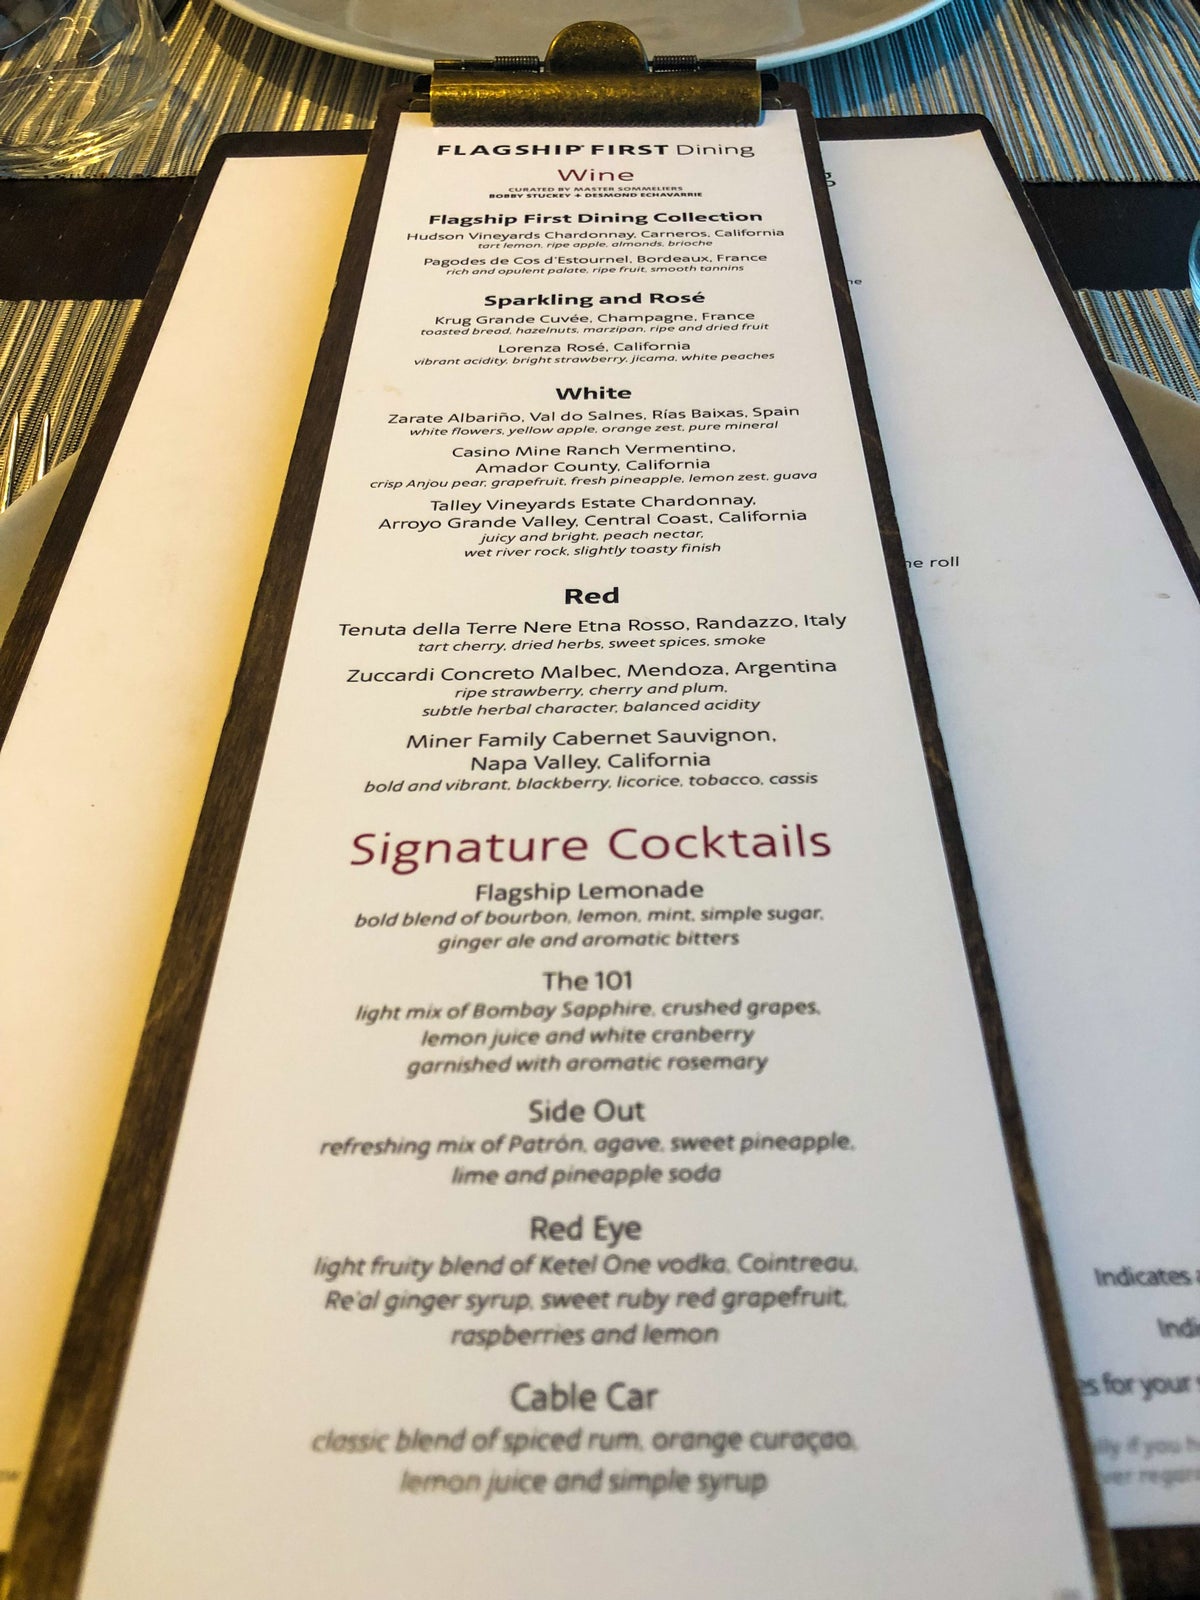 American Airlines Flagship First Dining LAX drink menu close-up